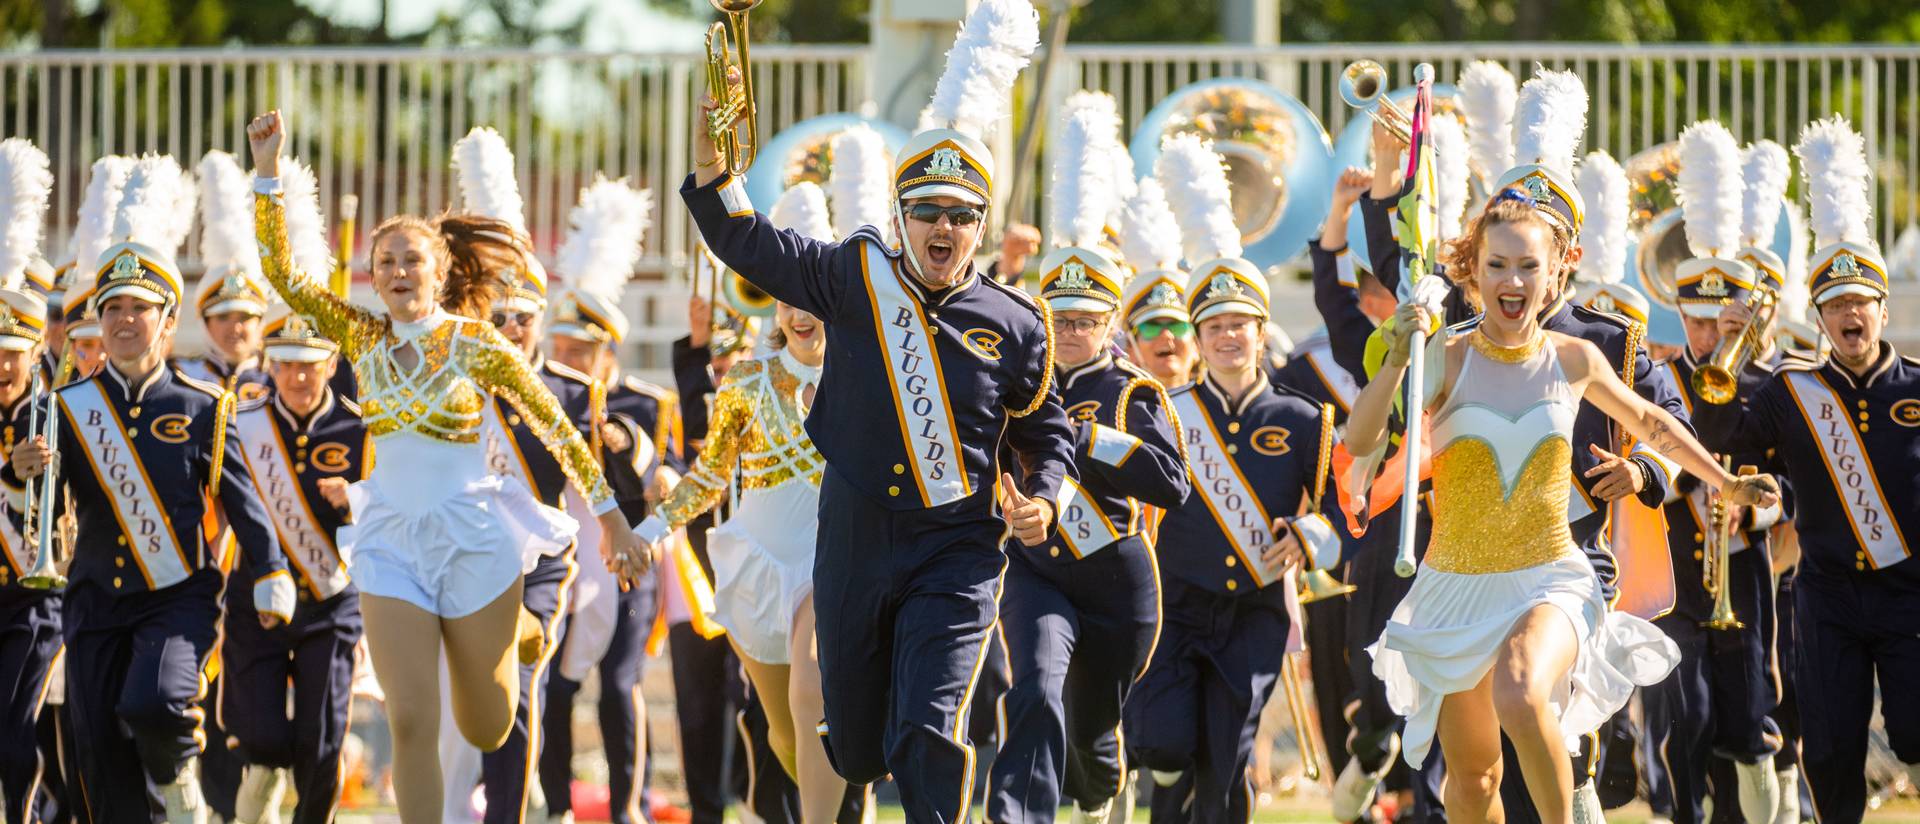 Members of the Blugold Marching Band race down the field during a halftime performance at a football game.